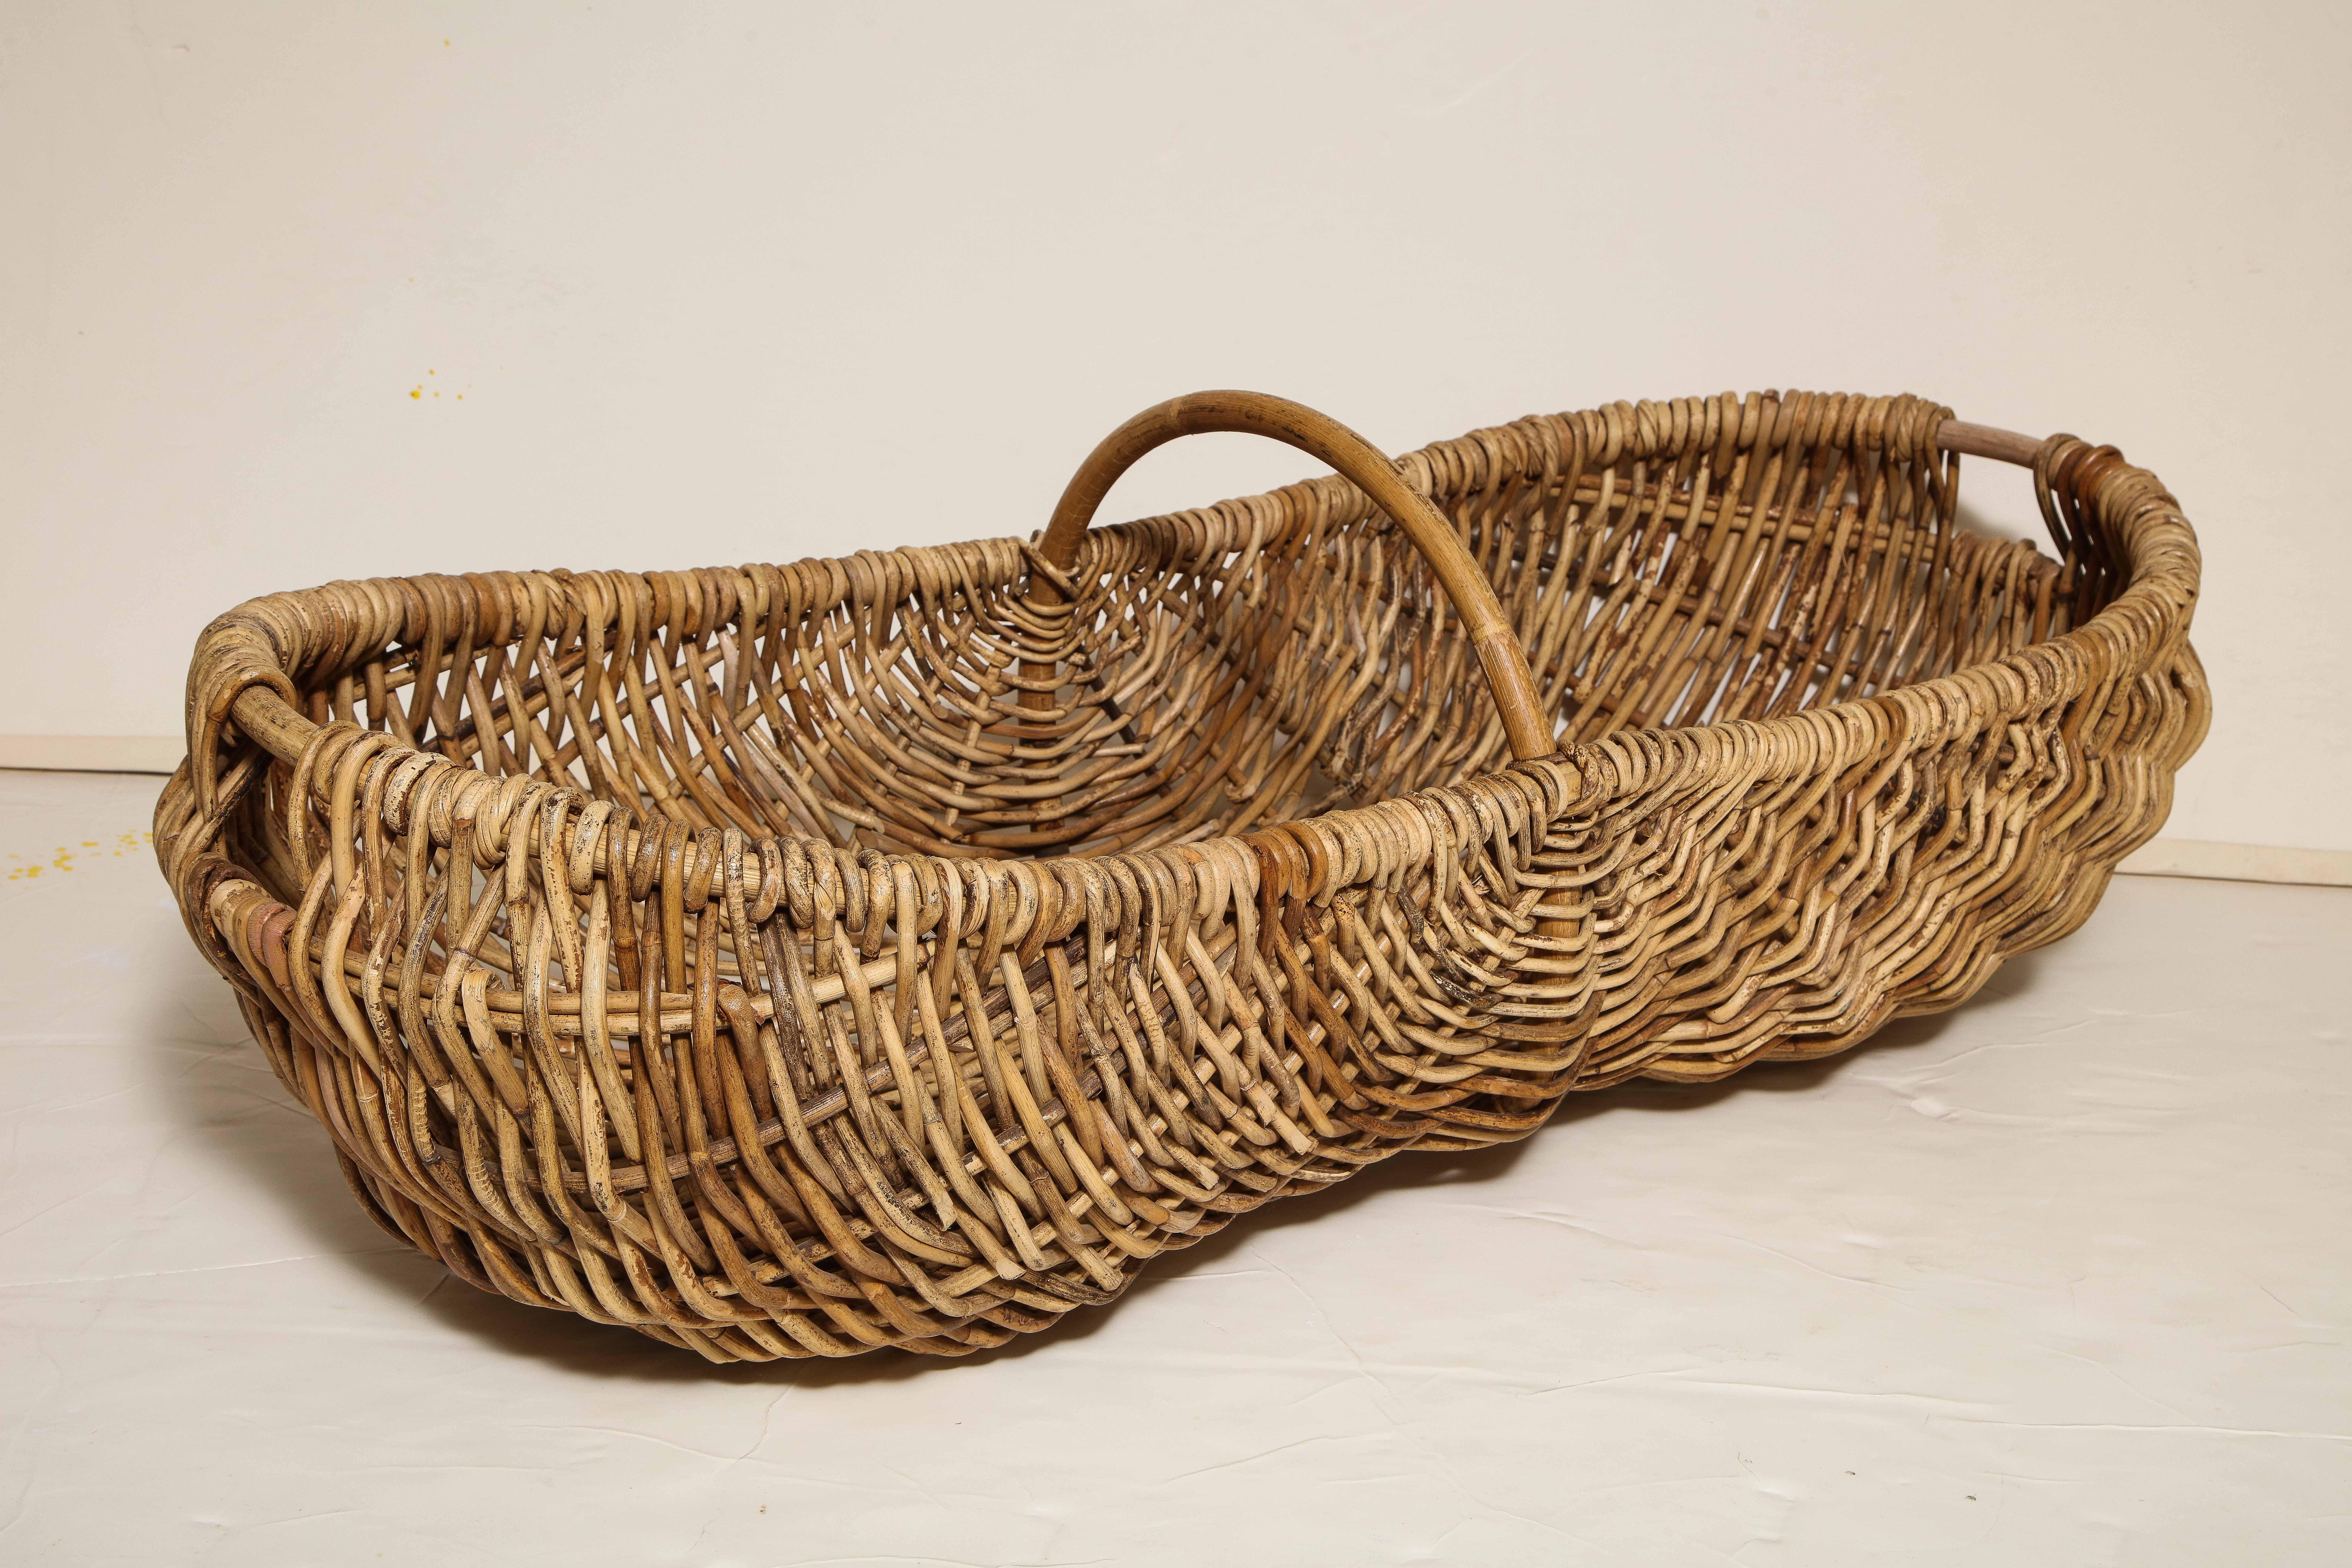 This sturdy basket from France features a long, deep container with a handle. Once used in the production of champagne, this great looking piece can now serve as a container for logs, linens, magazines, anything!